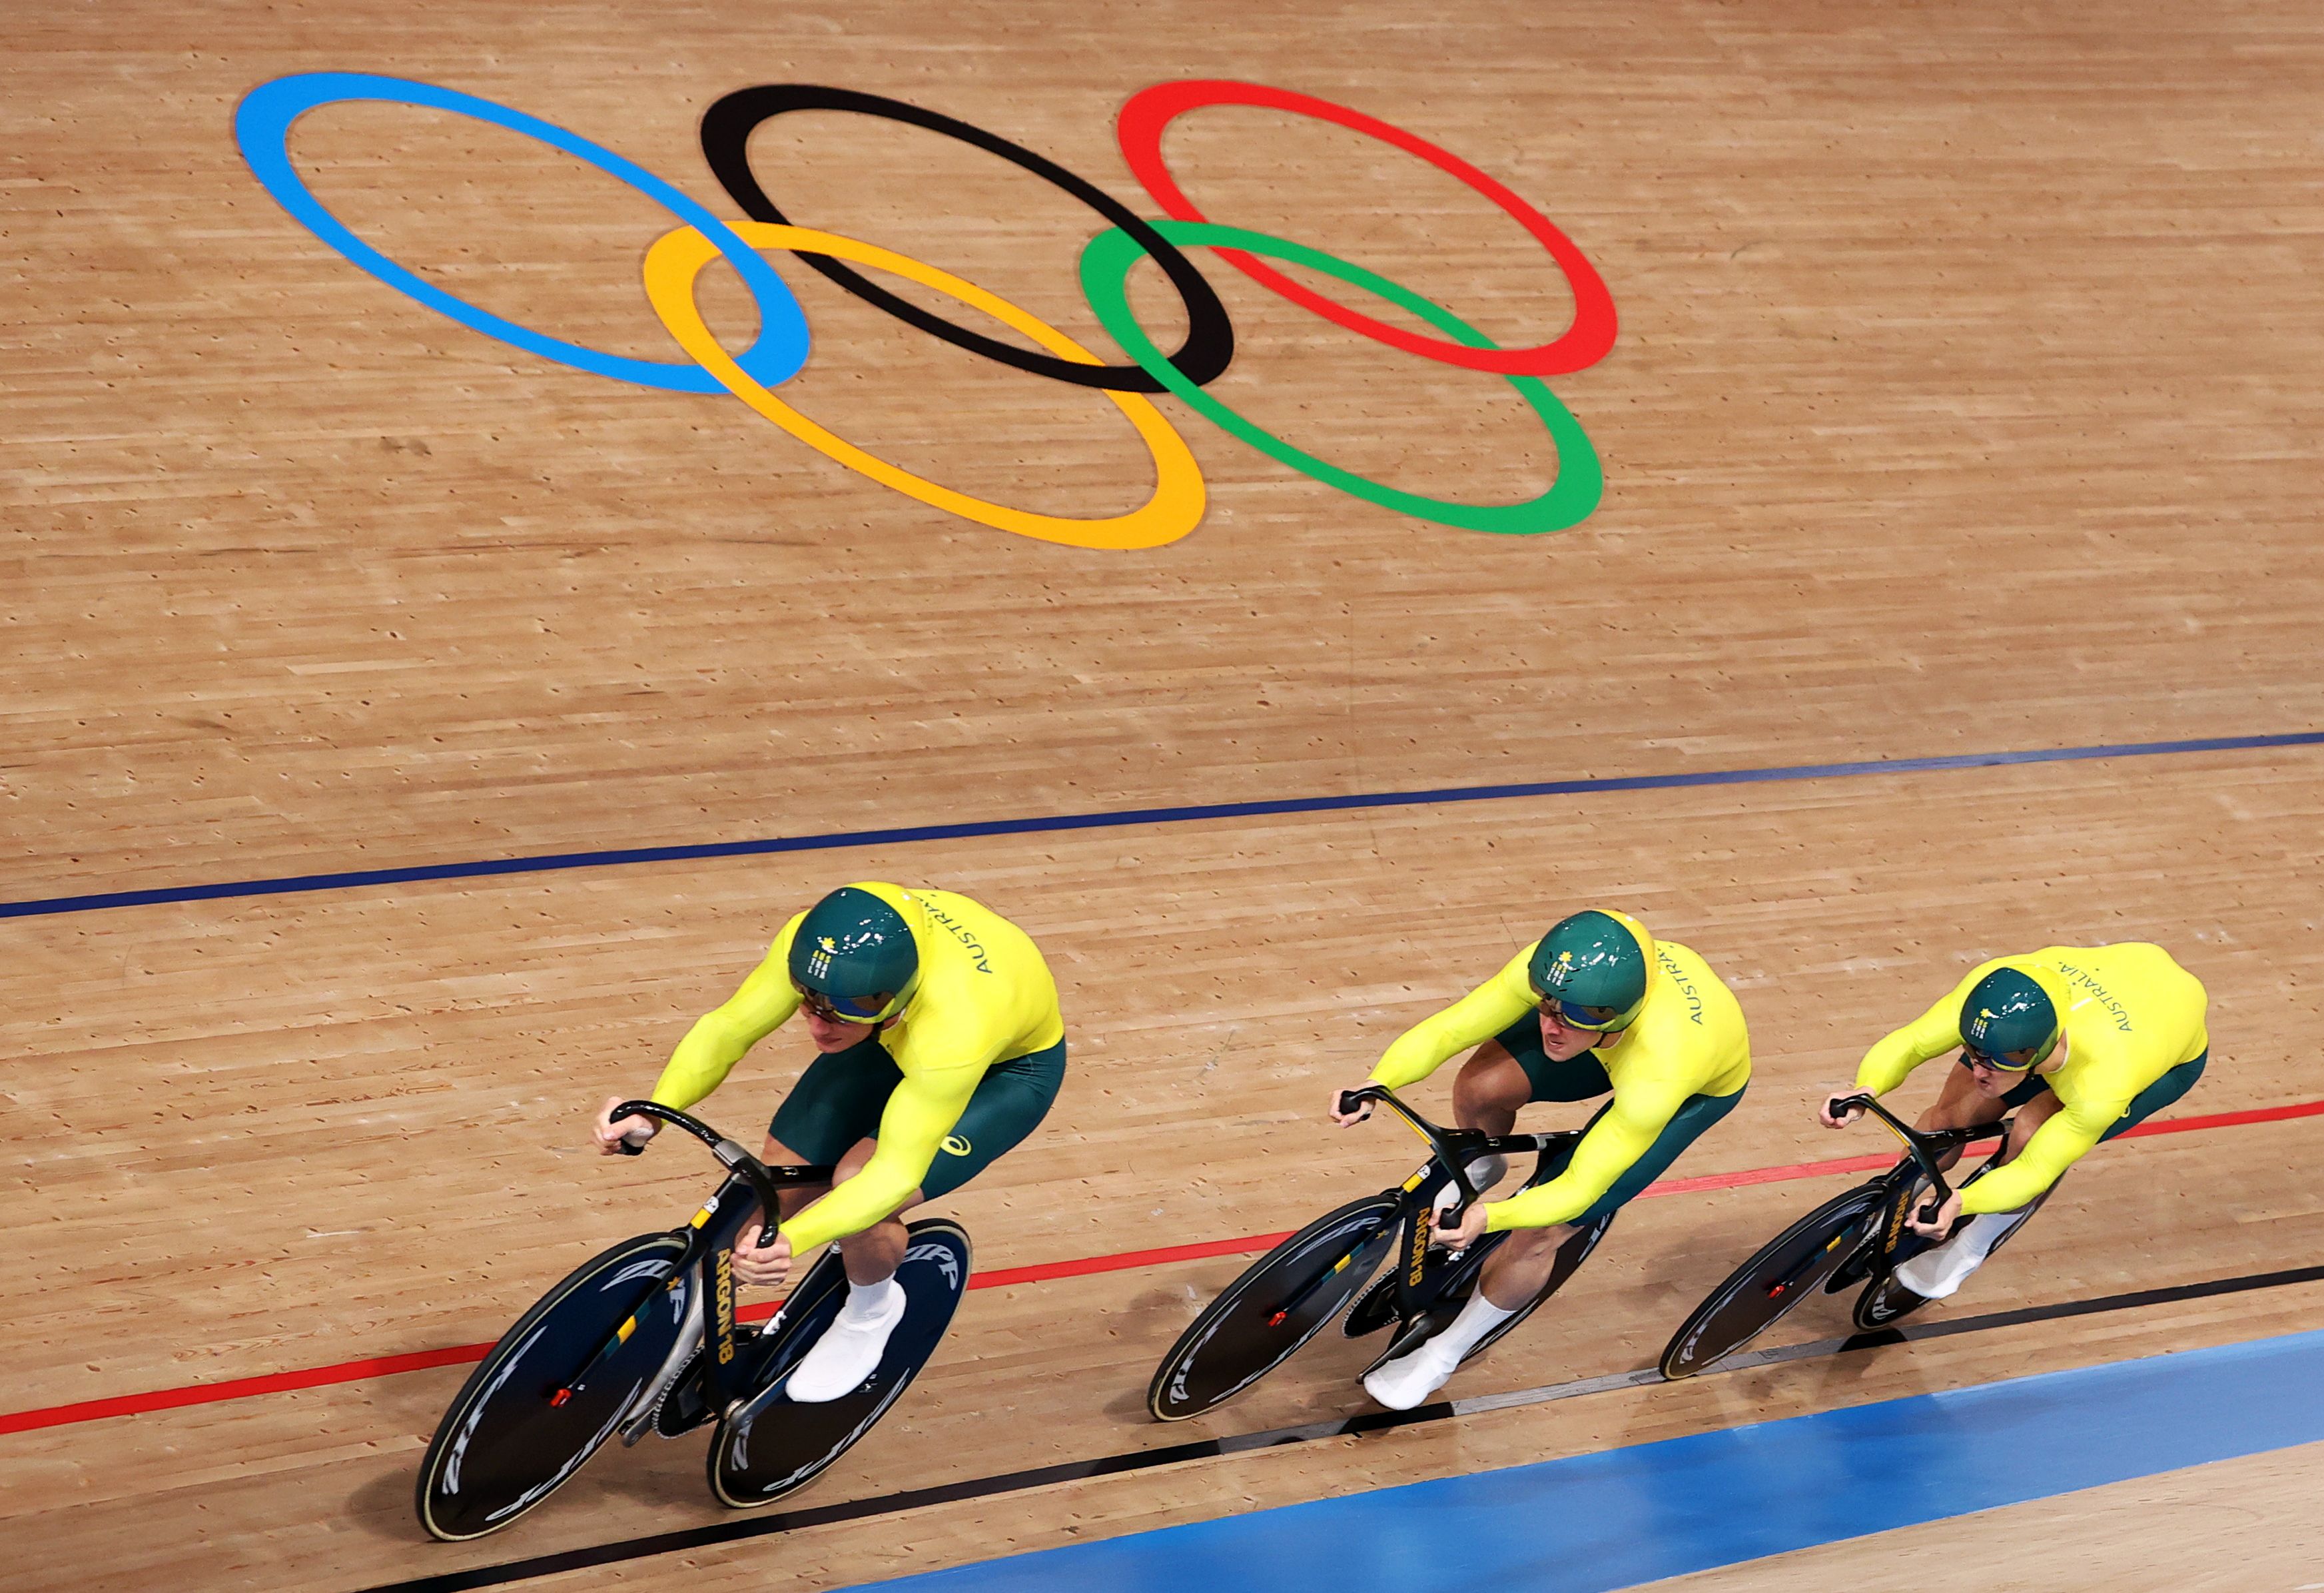 Cycling-Australian Glaetzer from track | Reuters